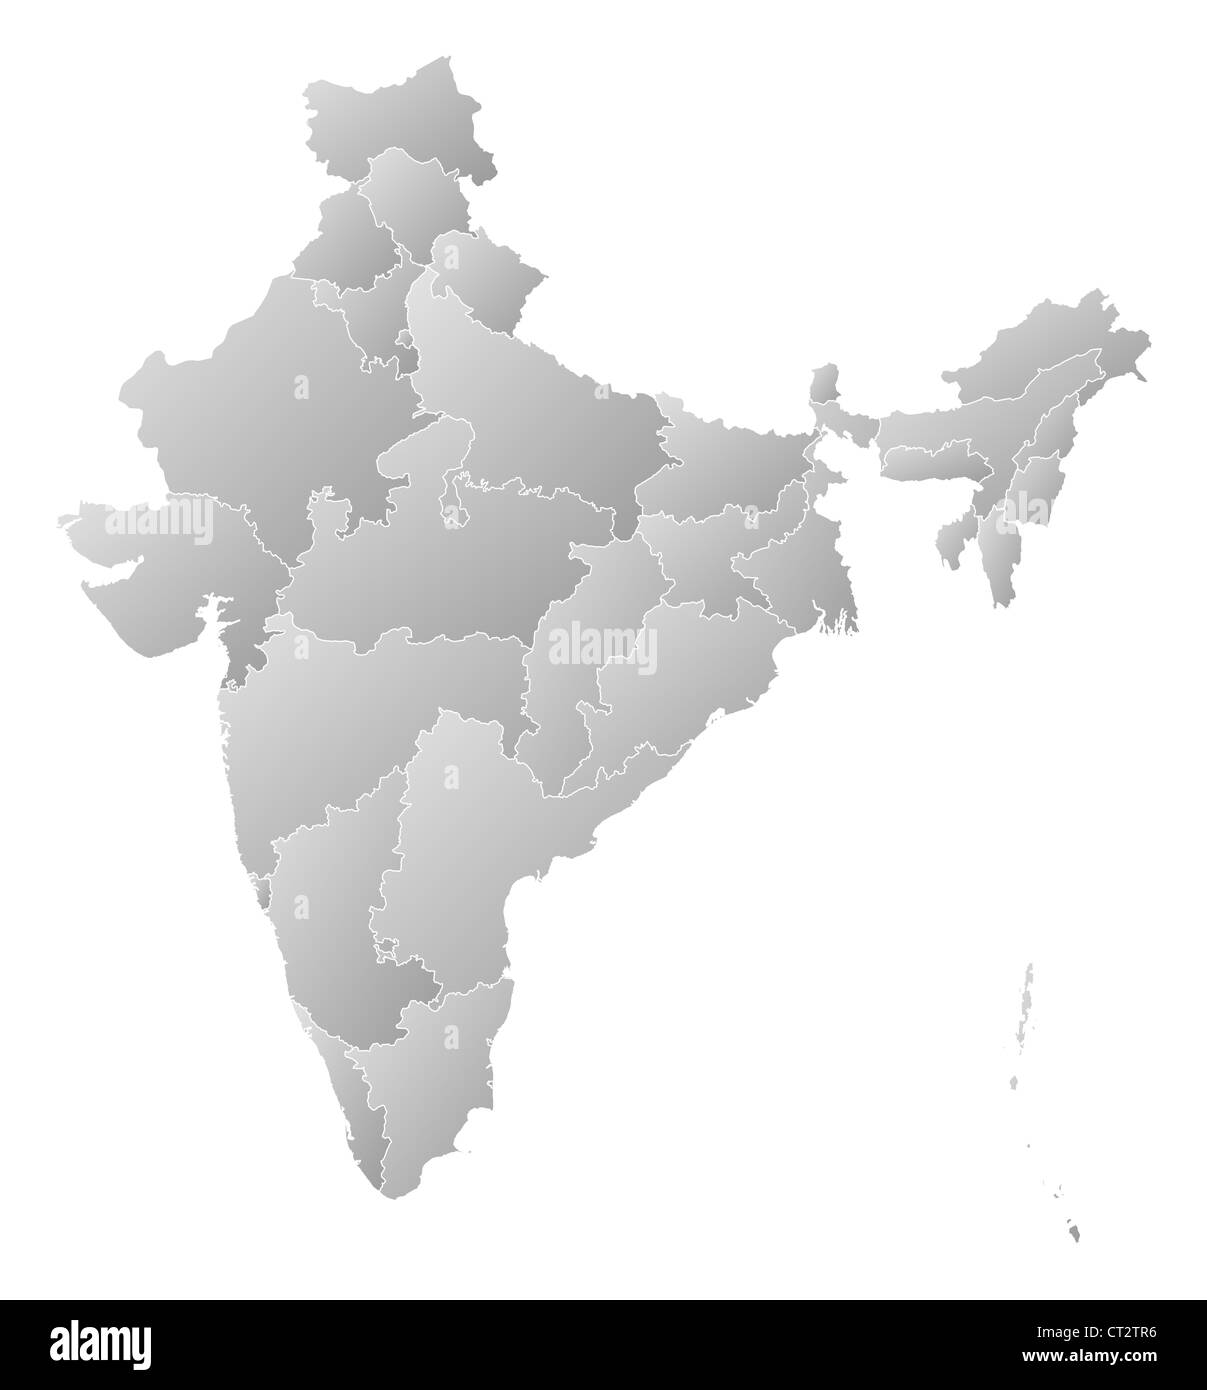 Political map of India with the several states where Lakshadweep is highlighted. Stock Photo